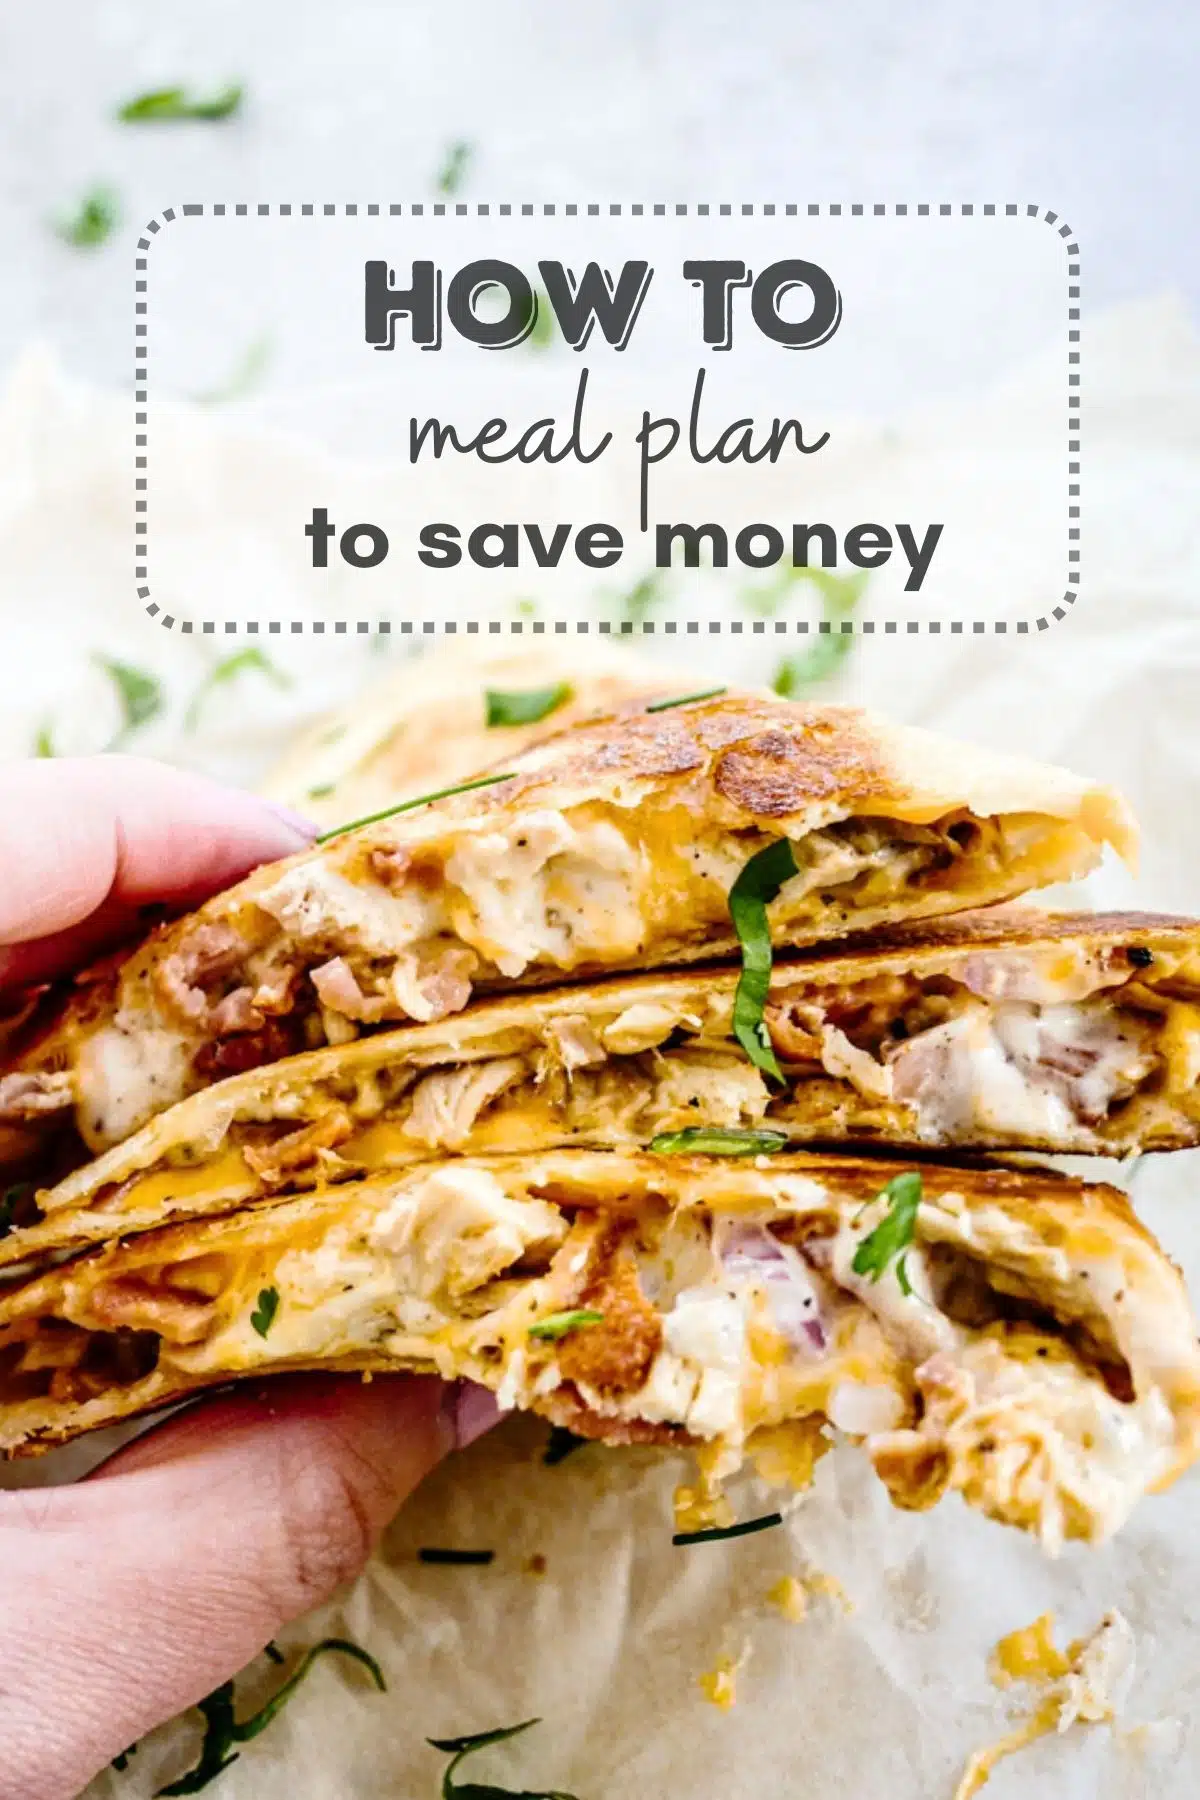 How to Meal Plan to Save Money